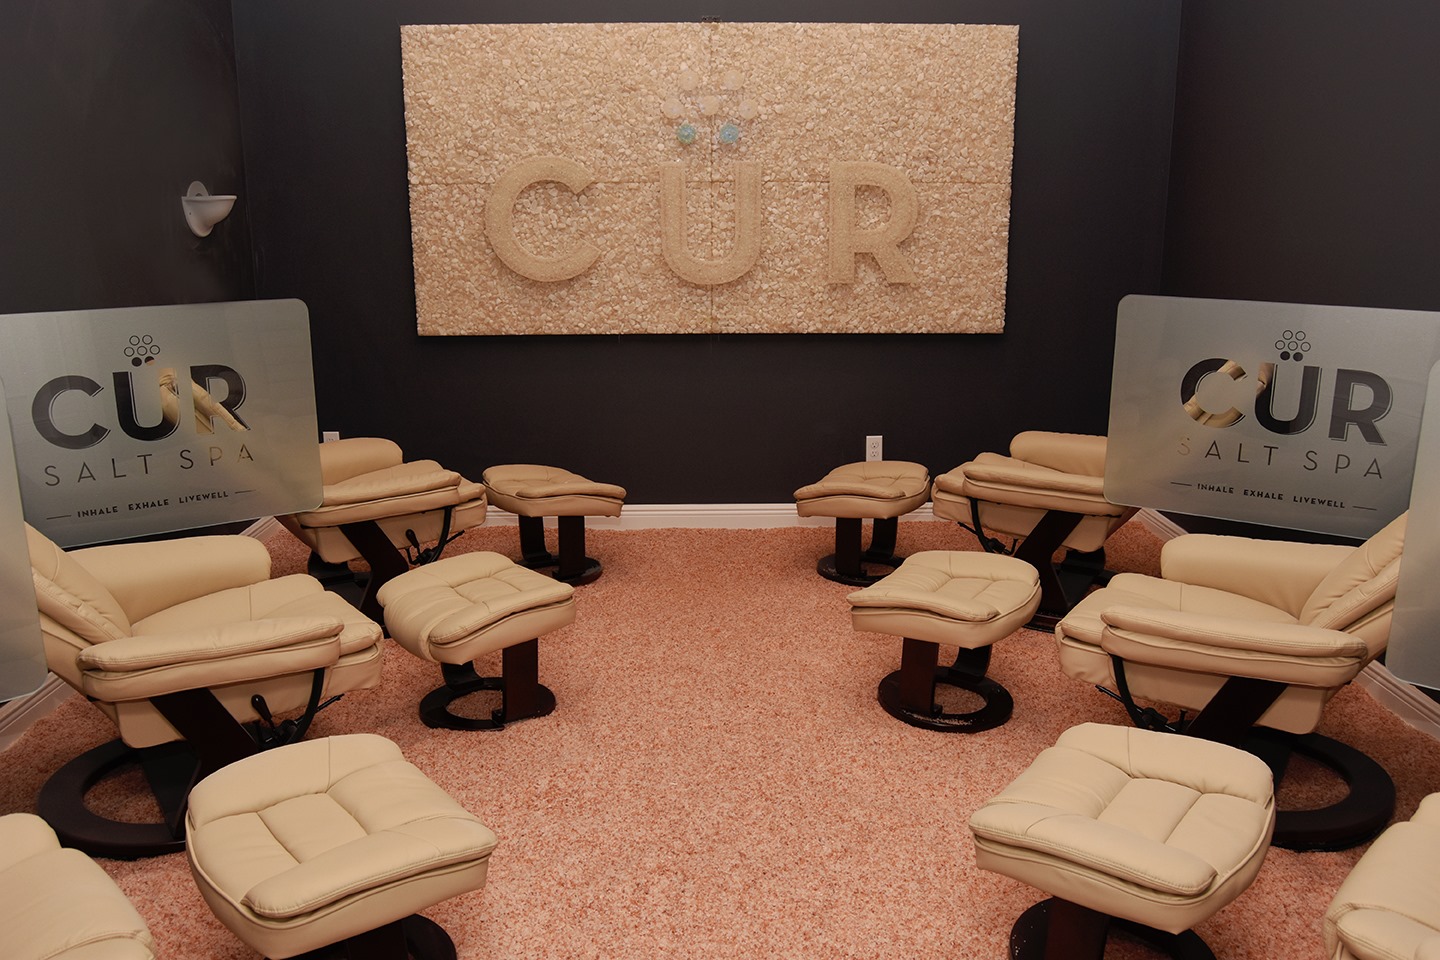 Four Cushioned Lounge Chairs With Dividers That Say &Quot;Cur Salt Spa Inhale Exhale Livewell&Quot; On A Salt-Covered Floor With A Large Rectangular Salt Brick Décor That Has &Quot;Cur&Quot; On It.